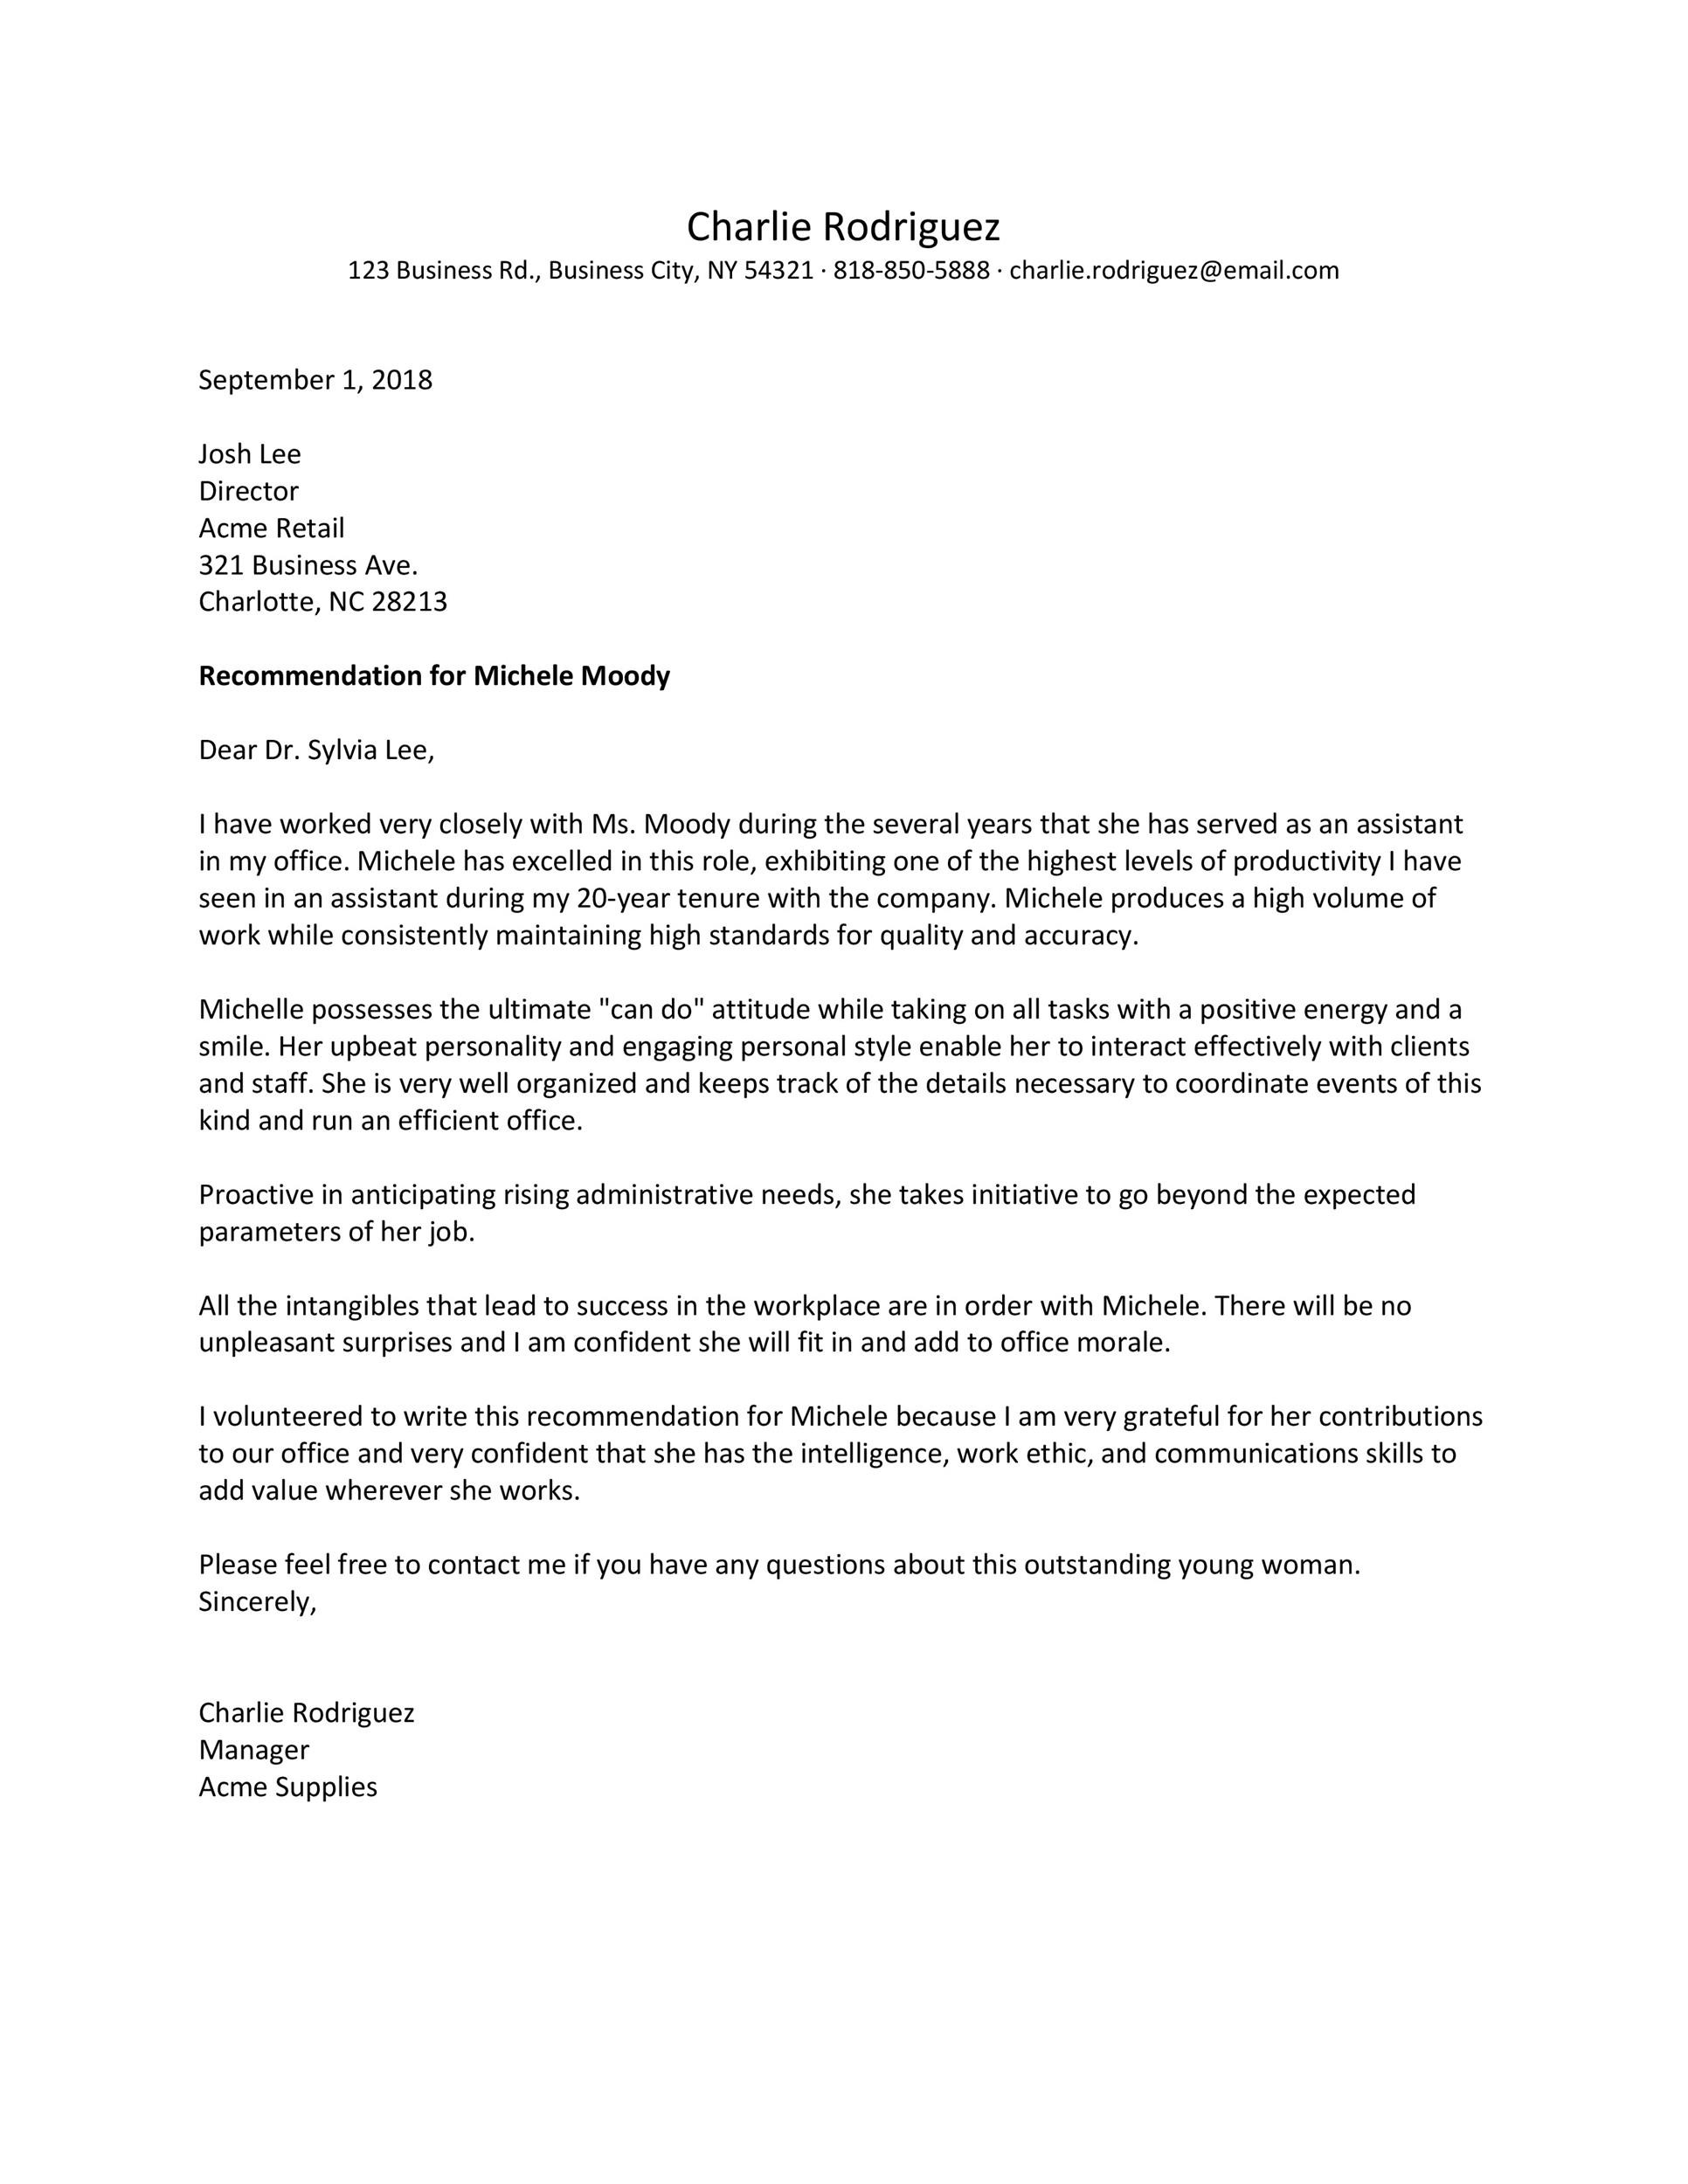 Recommendation Letter Sample For Job from templatelab.com